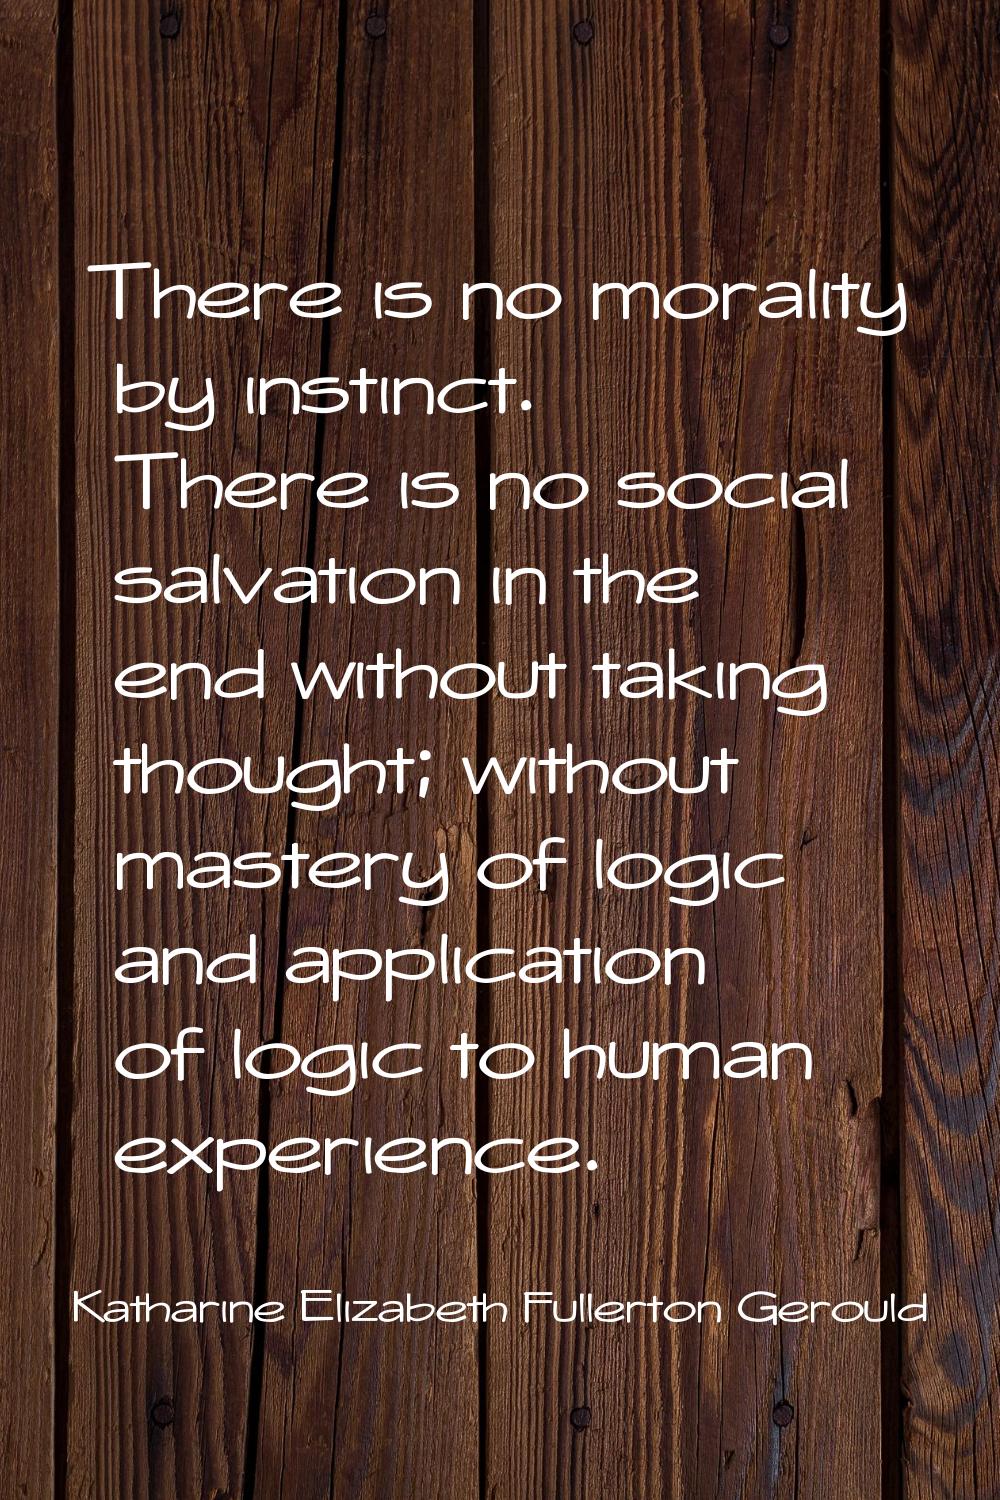 There is no morality by instinct. There is no social salvation in the end without taking thought; w